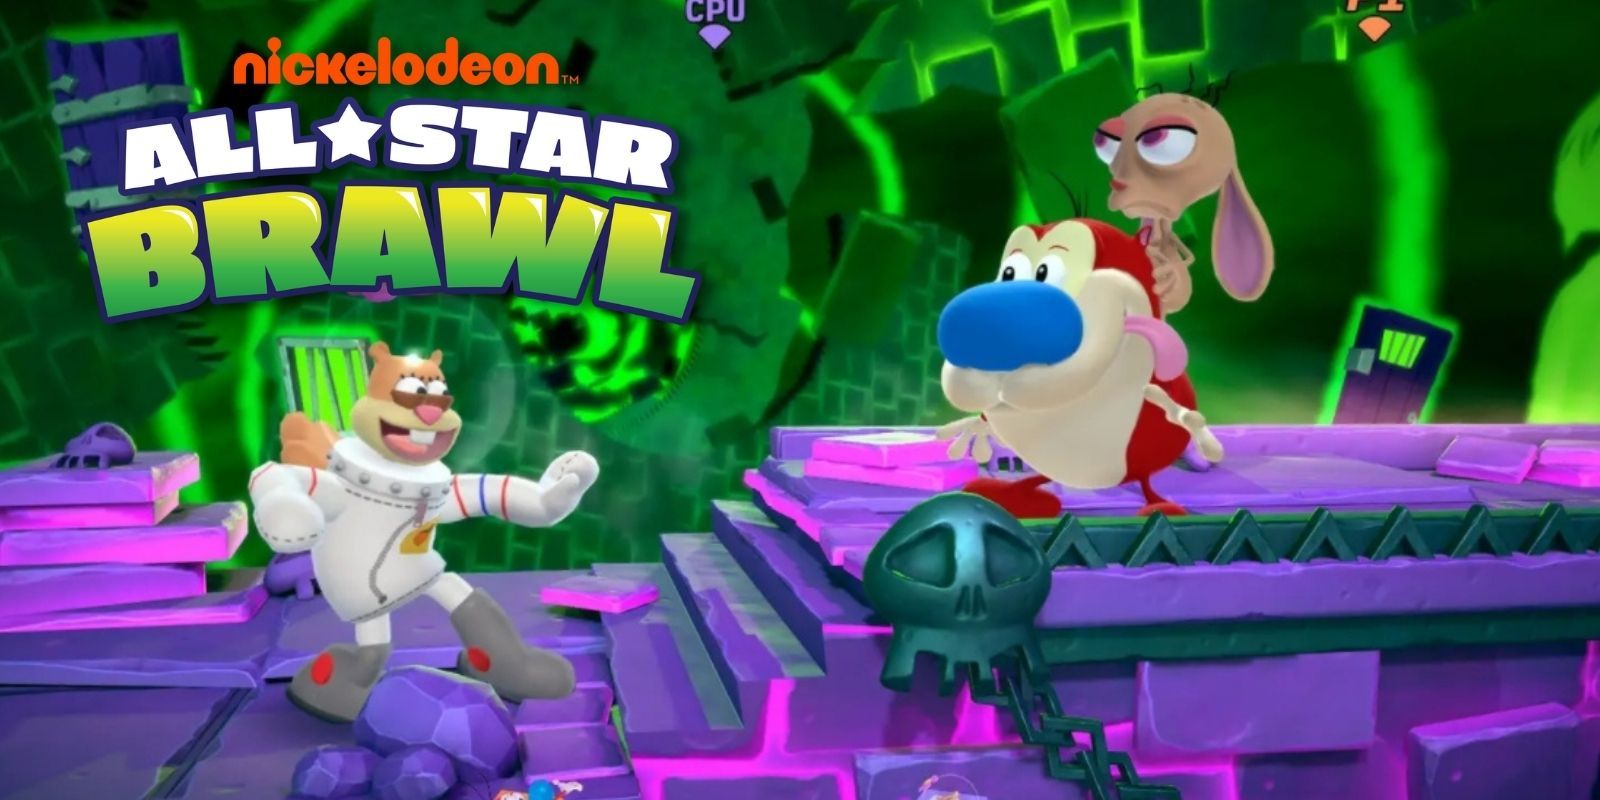 Ren and Stimpy go up against Sandy Cheeks in Nickelodeon All-Star Brawl